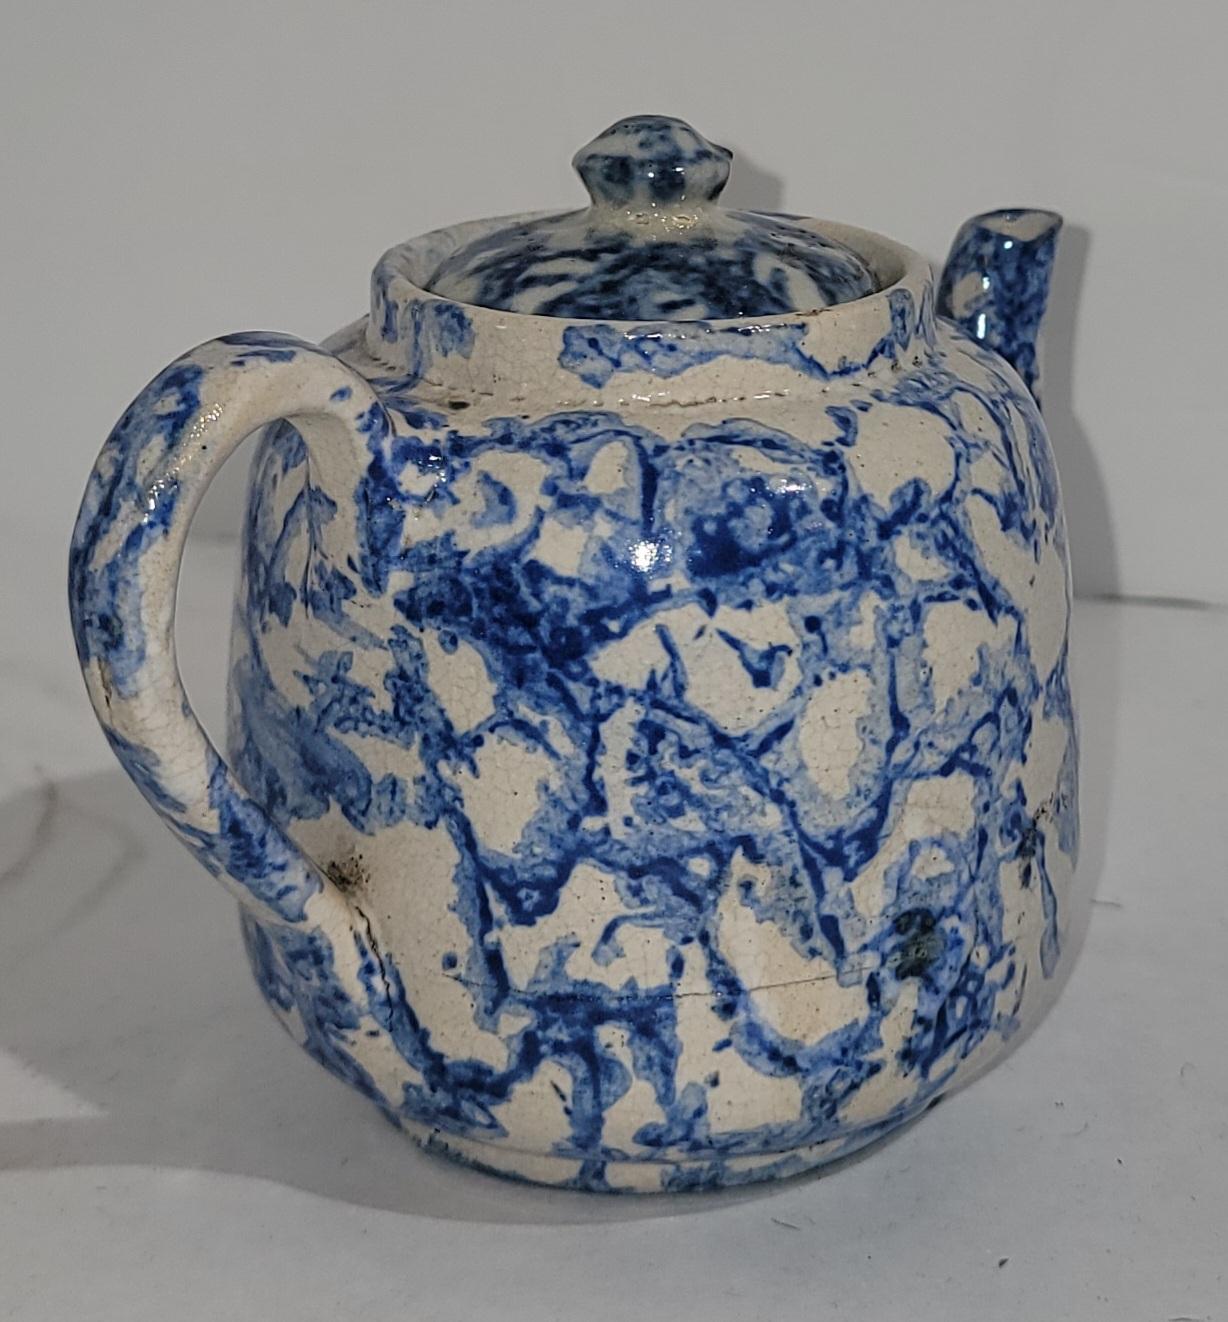 This very early and rare 19thc sponge ware one cup tea pot is in pristine condition.This wonderful little charming piece is a great addition to any collection.